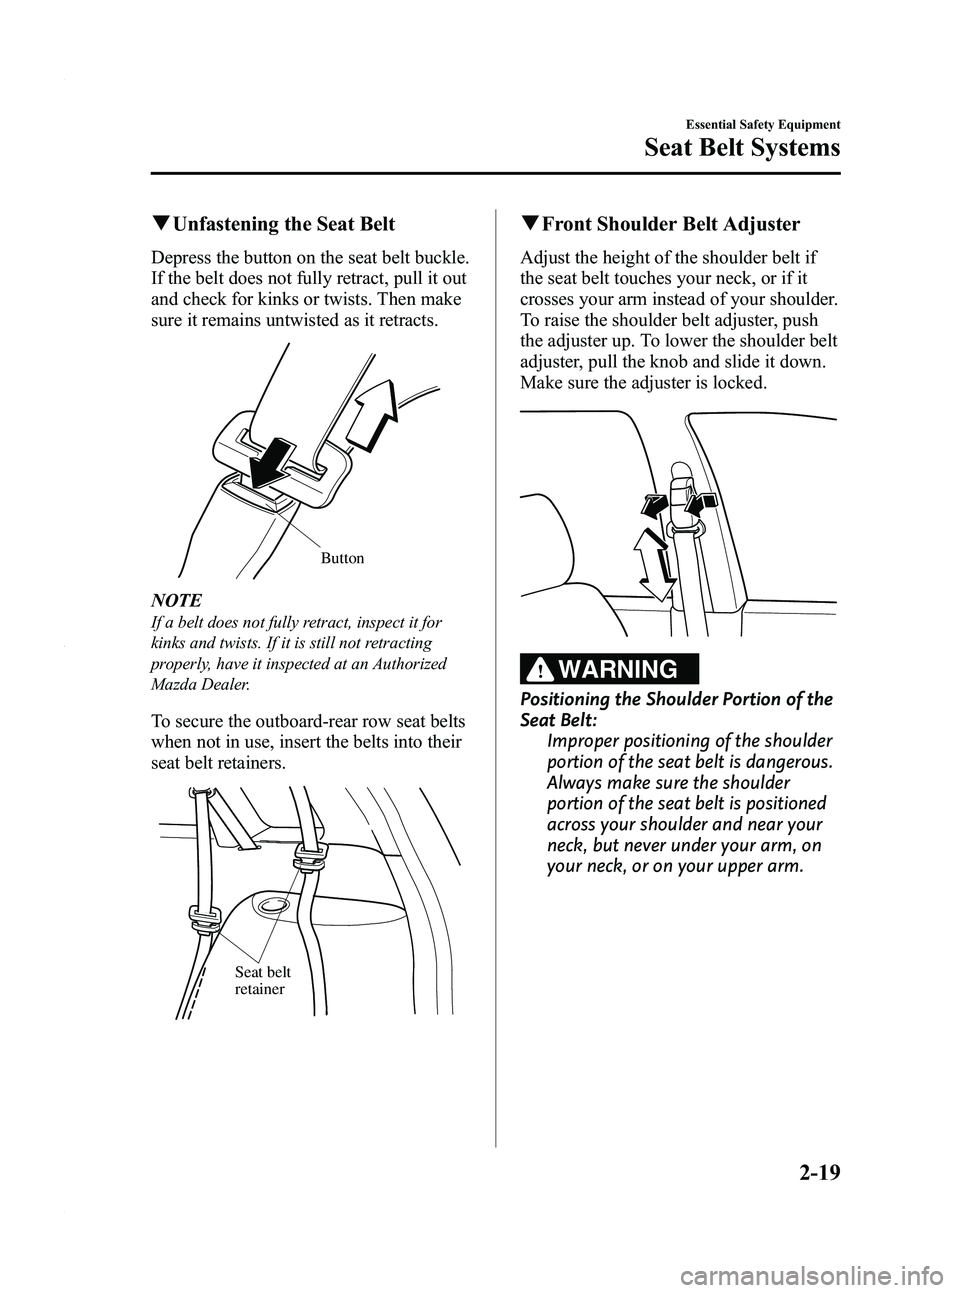 MAZDA MODEL 5 2010  Owners Manual Black plate (31,1)
qUnfastening the Seat Belt
Depress the button on the seat belt buckle.
If the belt does not fully retract, pull it out
and check for kinks or twists. Then make
sure it remains untwi